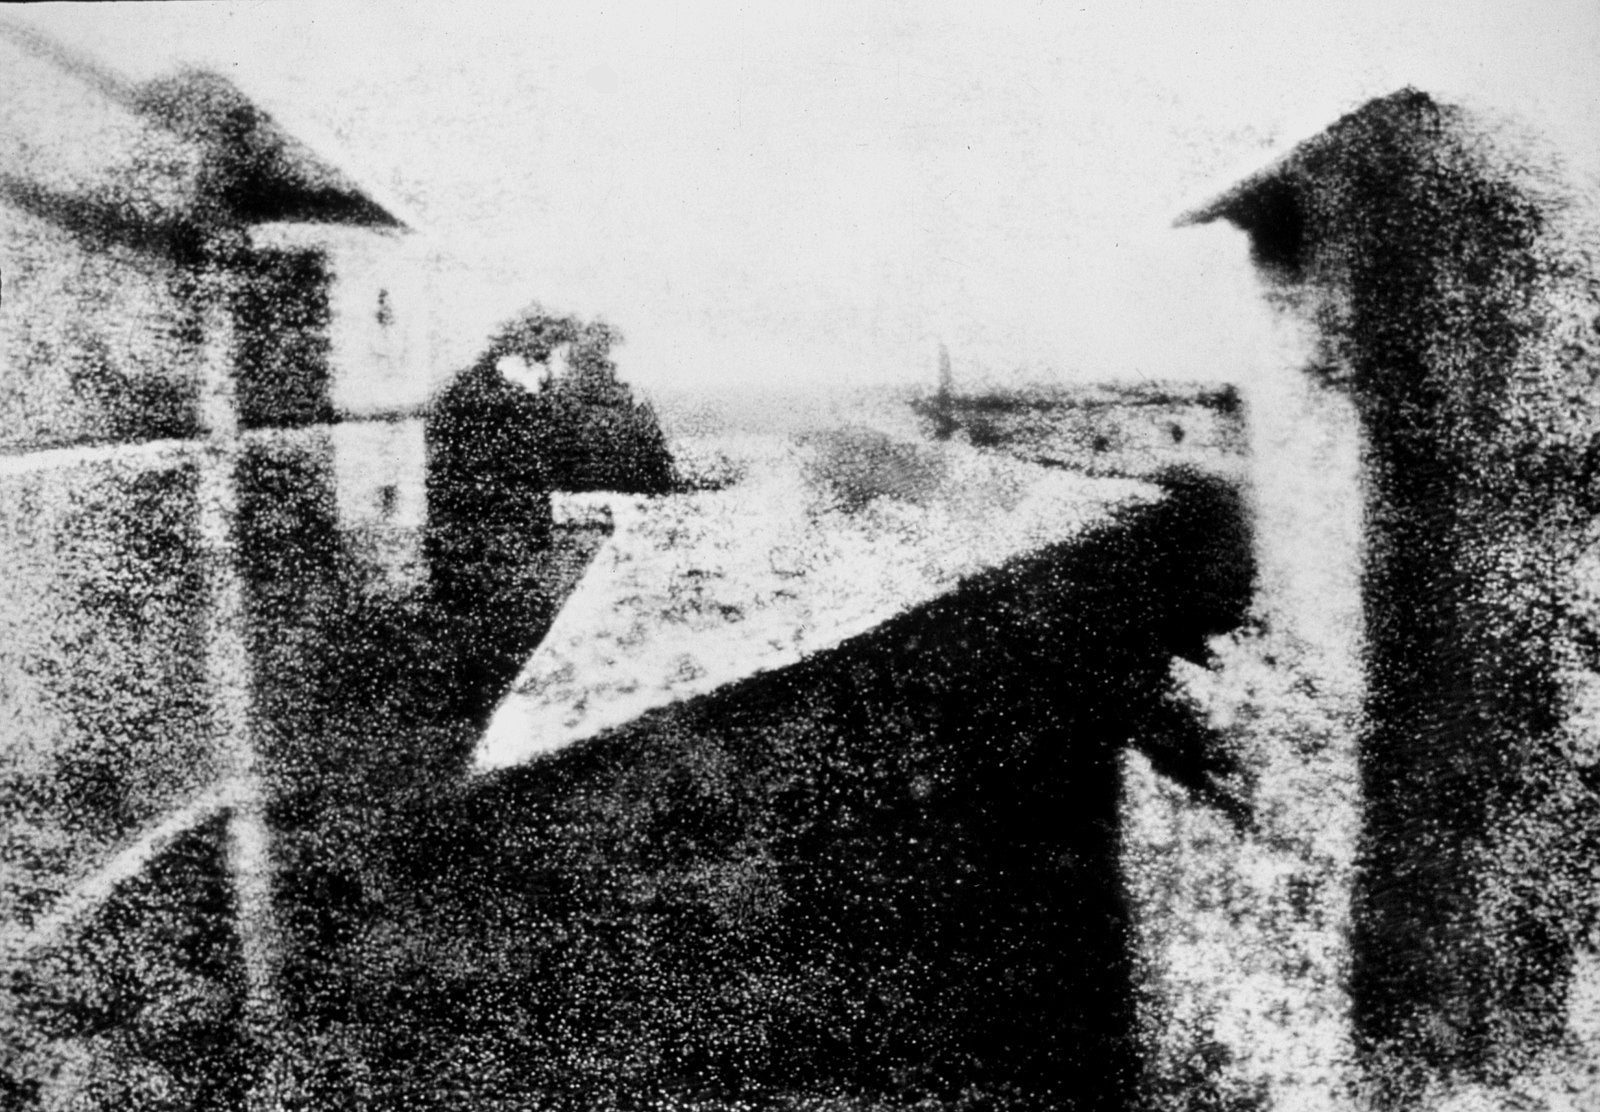 The worlds oldest photograph - a view from the window of Niépce's estate in Burgundy, France